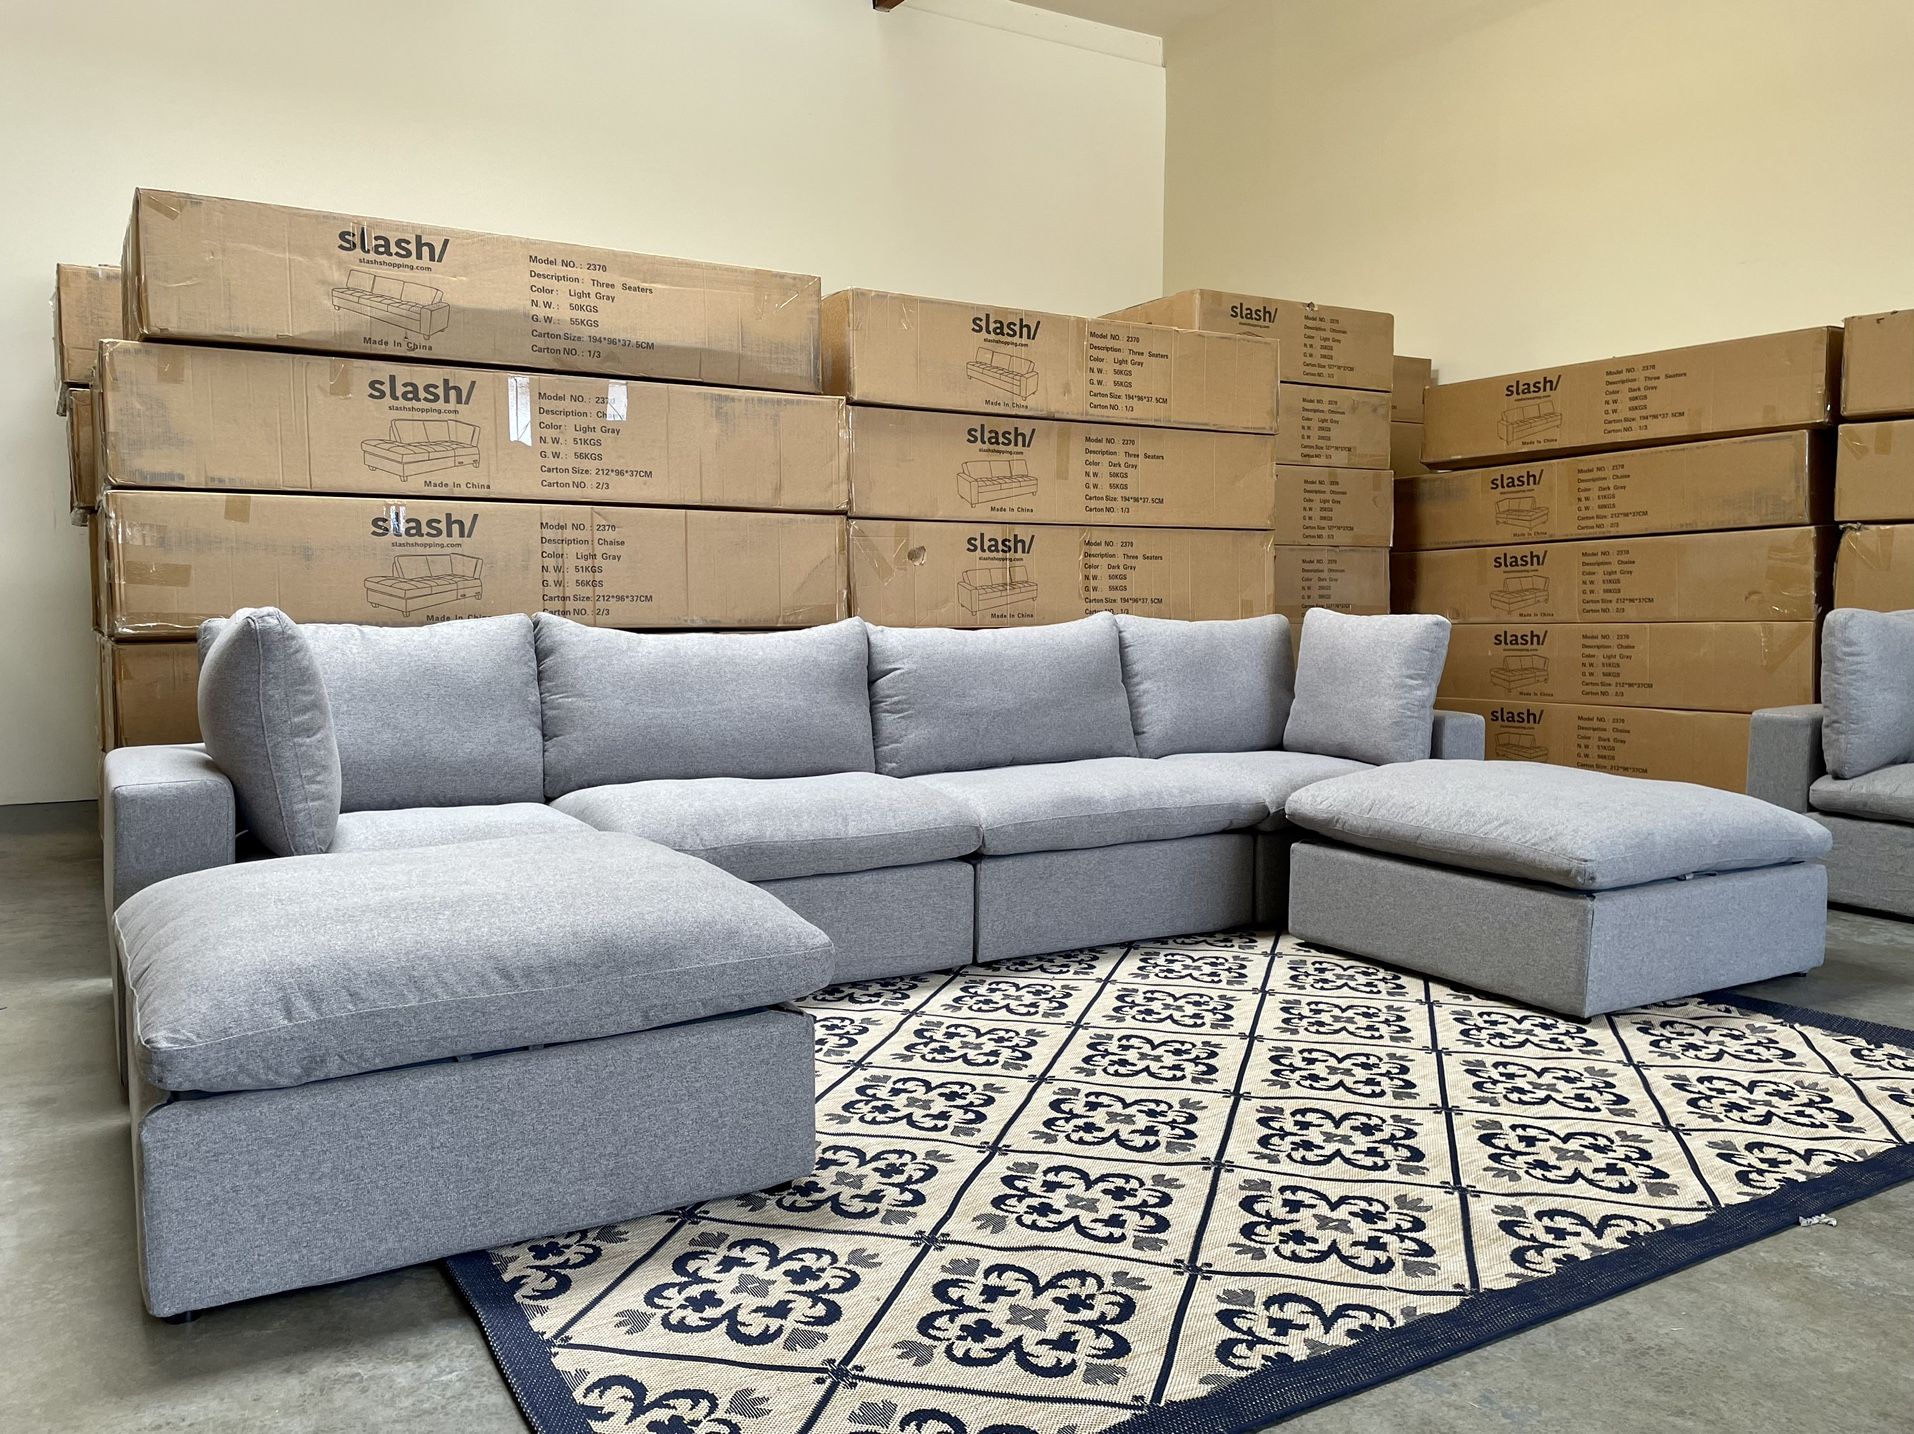 🏷Cloud 6pc Modular Sectional Sofa with Storage Ottoman, NEW IN BOX 📦 Washable Slipcover 💦 Water Repellent  🔥WAREHOUSE SALE ✅ Finance | Delivery